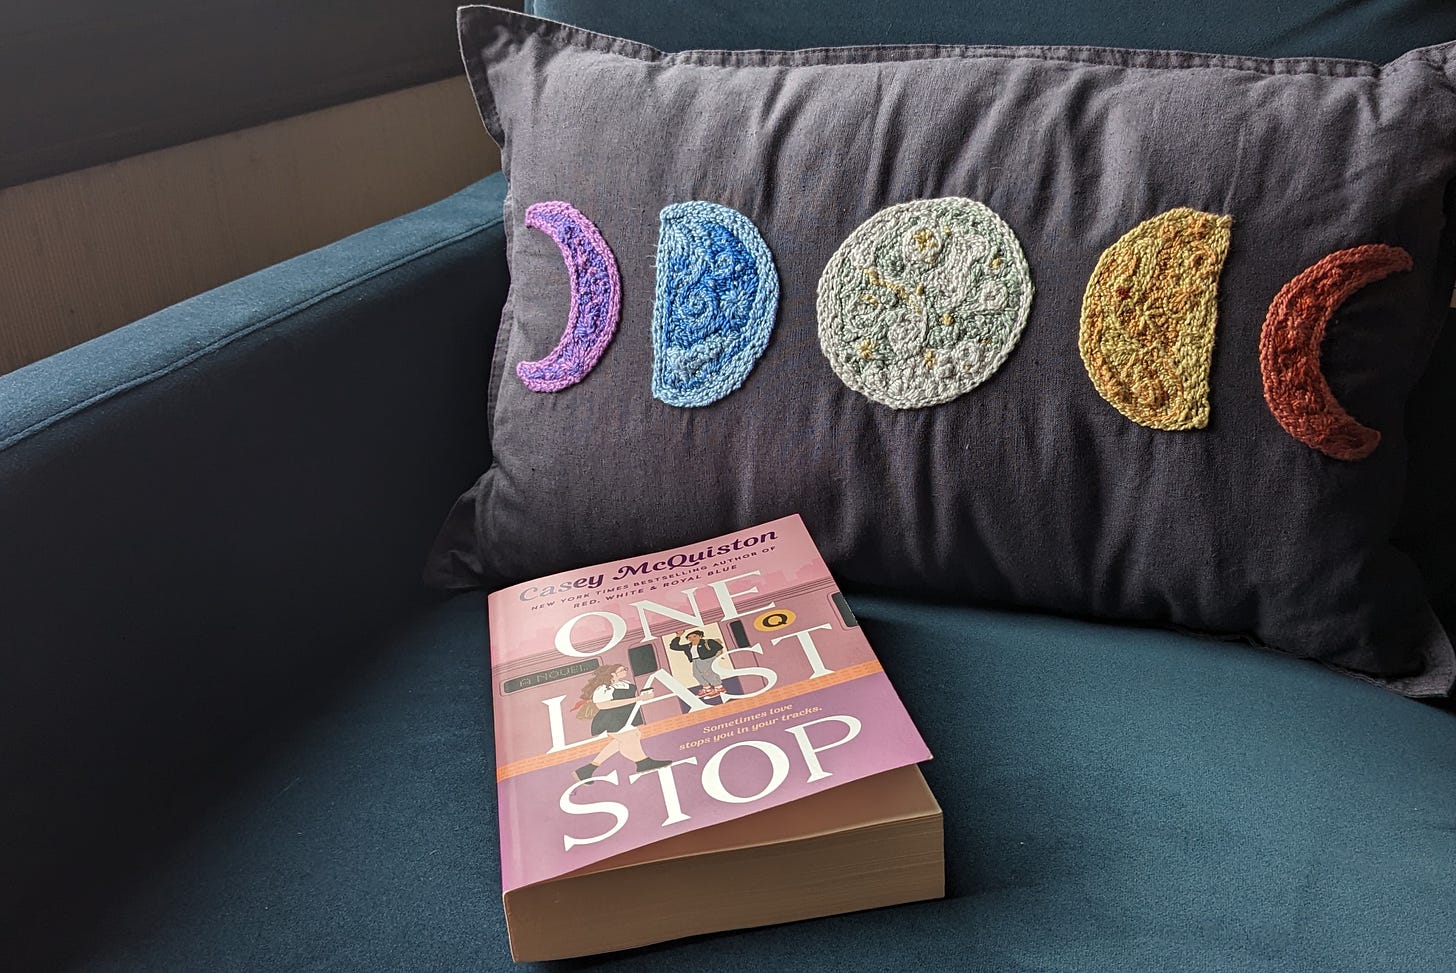 On a midnight blue velvet armchair is a dark grey pillow beautifully embroidered with five phases of the moon, in front of which is a pastel pink-and-purple paperback book with all-caps white letters that read 'ONE LAST STOP'.